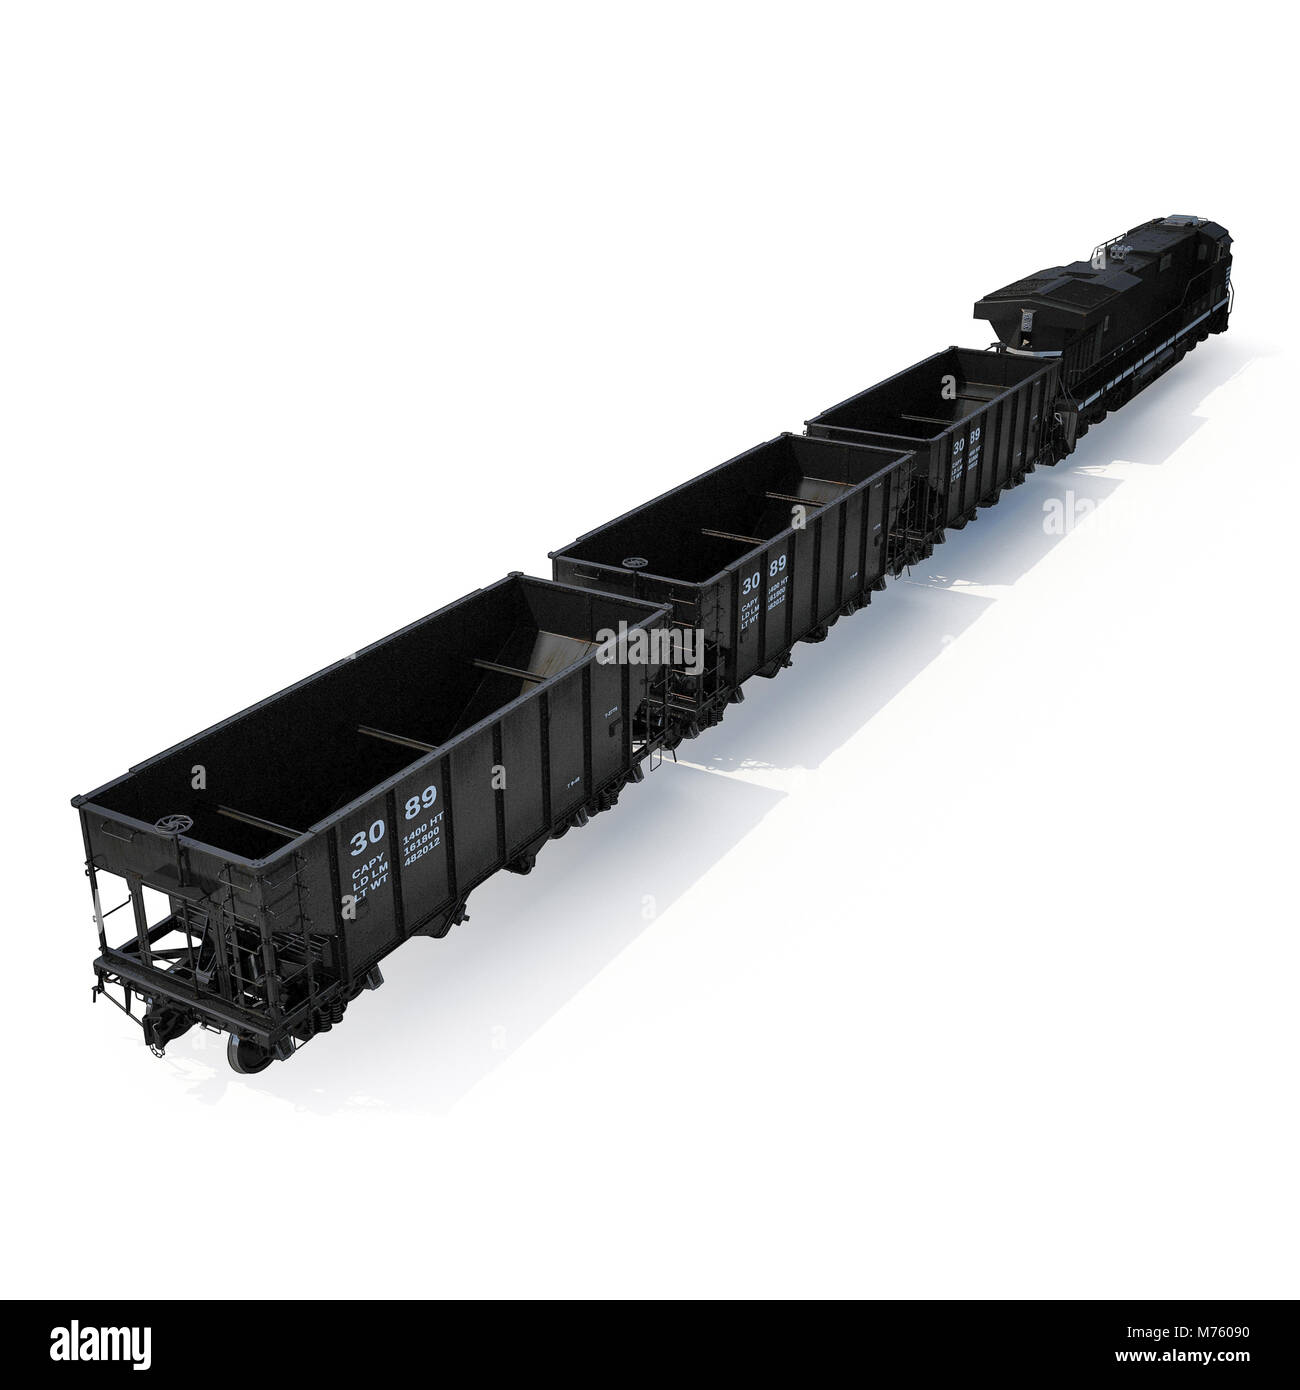 Page 3 - Train Bogie High Resolution Stock Photography and Images - Alamy